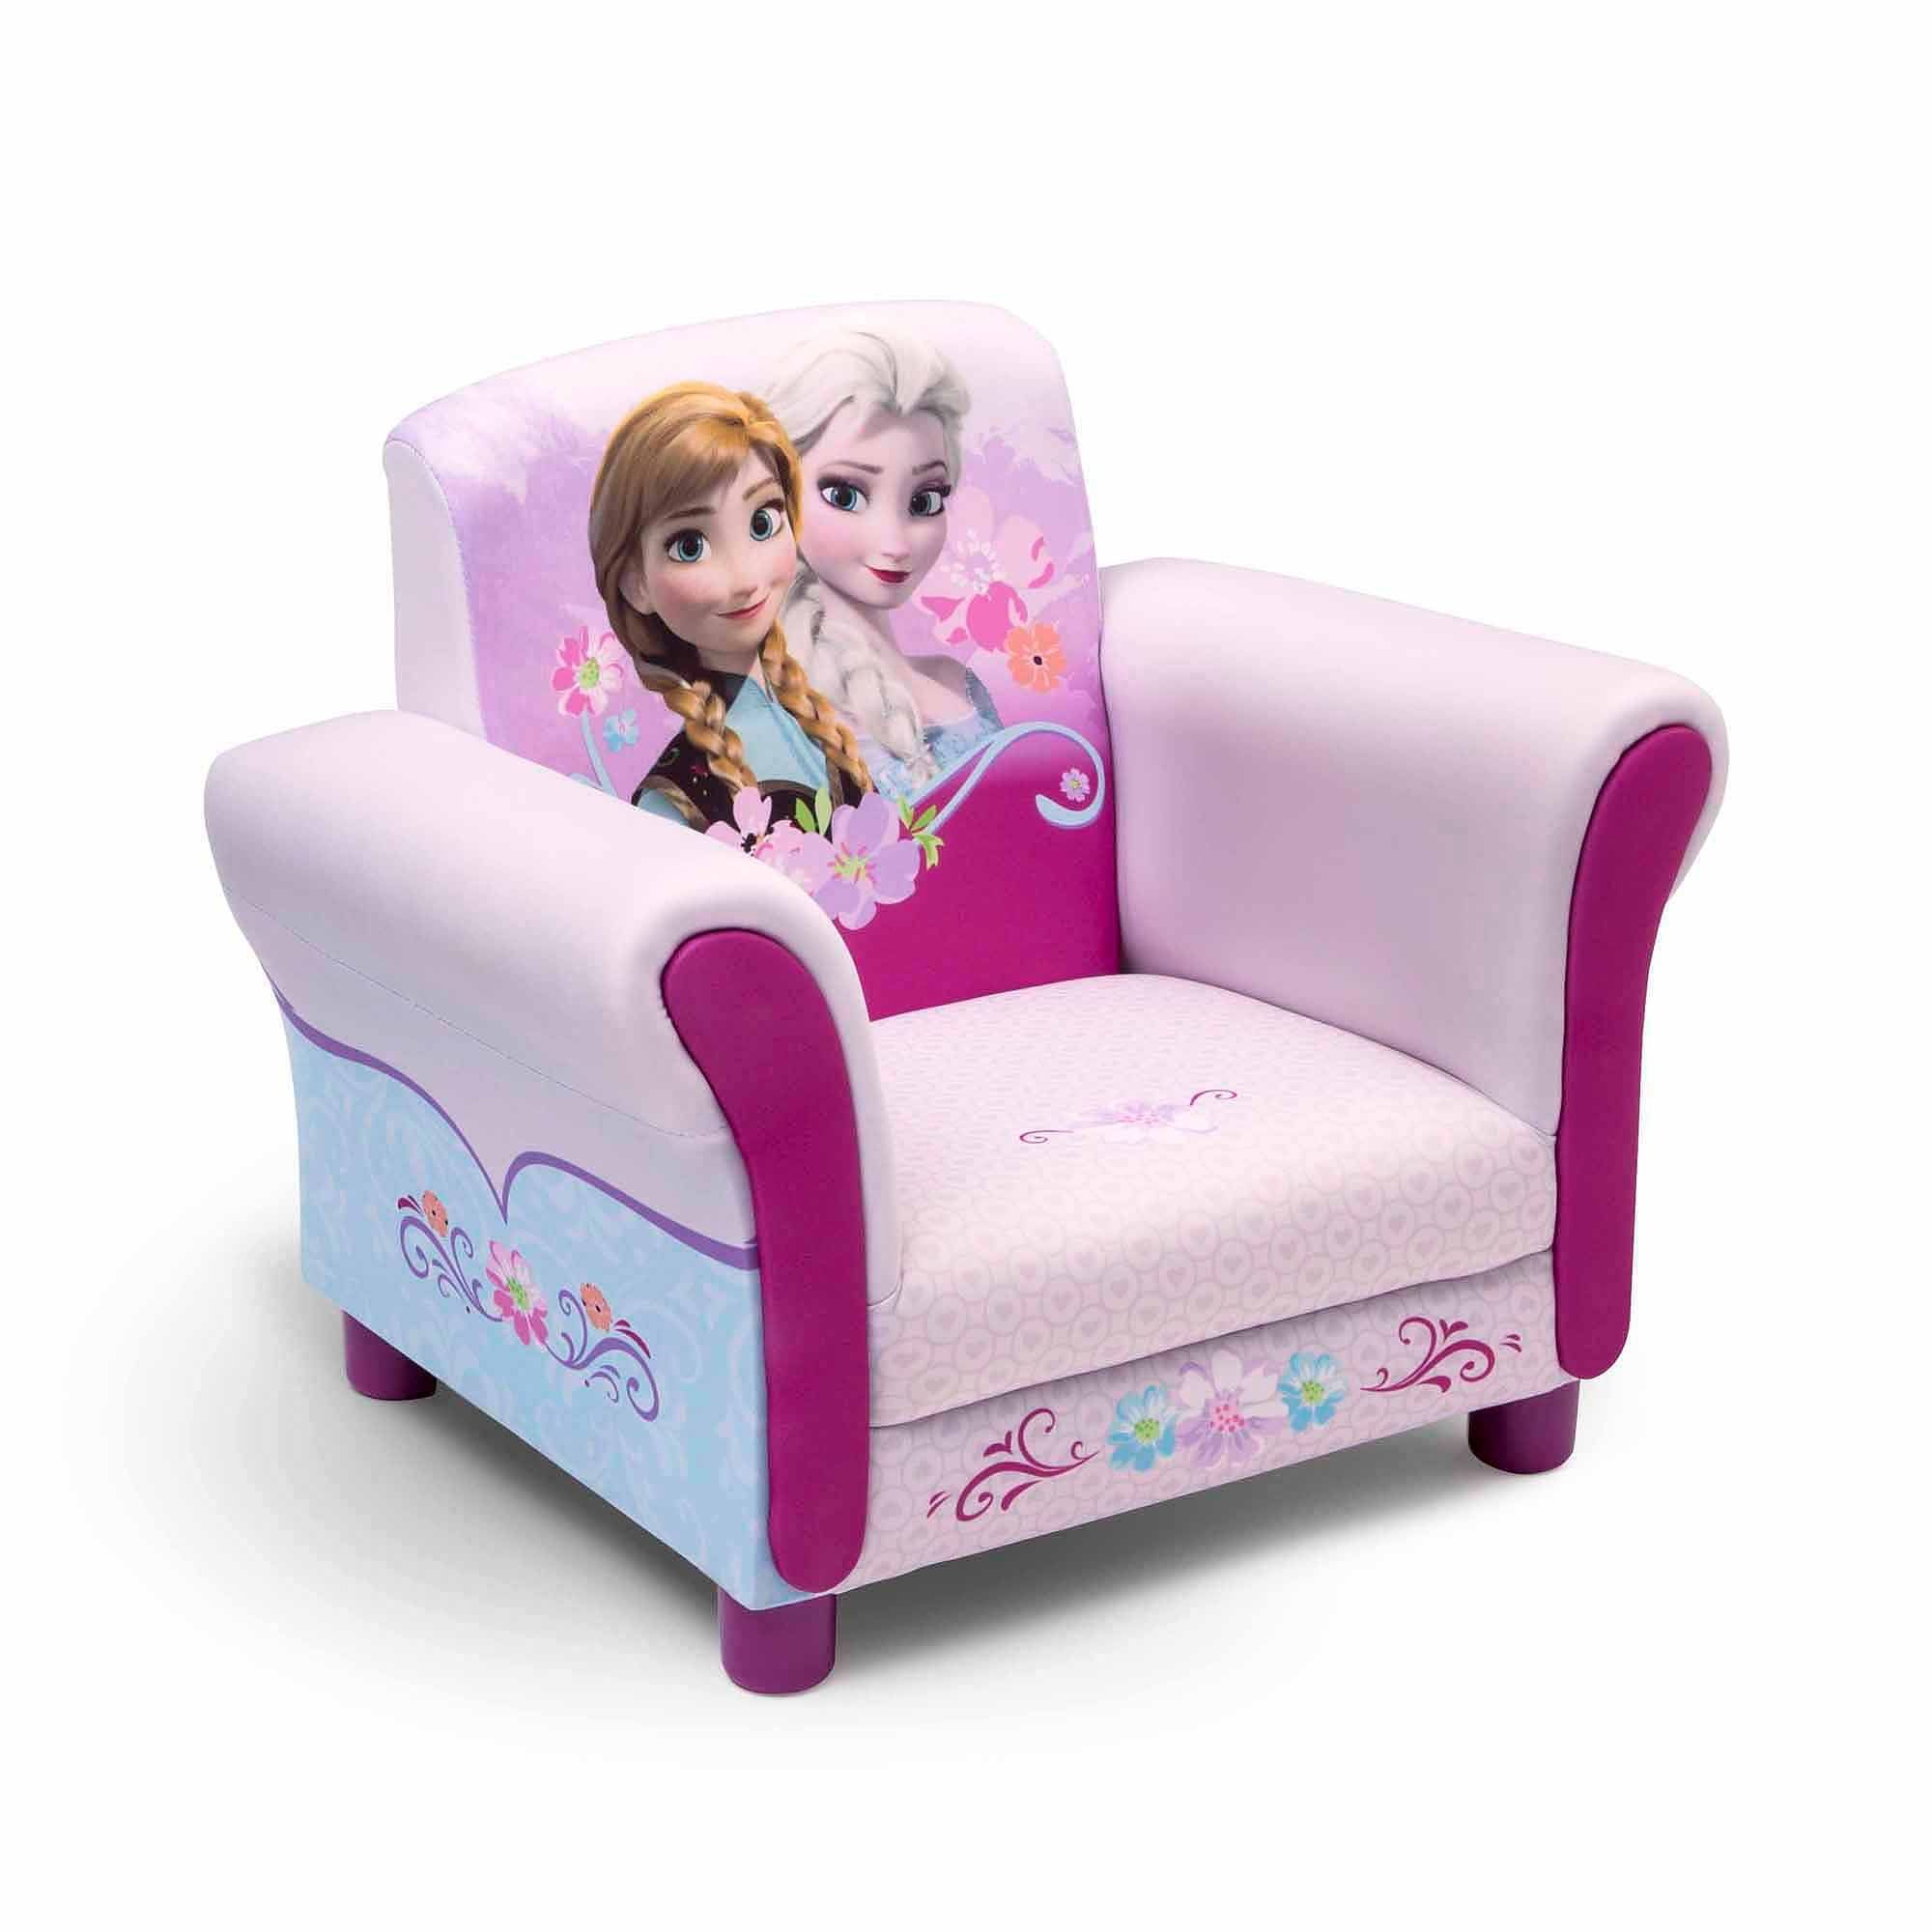 Disney Frozen Upholstered Chair Walmart With Regard To Toddler Sofa Chairs (View 11 of 15)